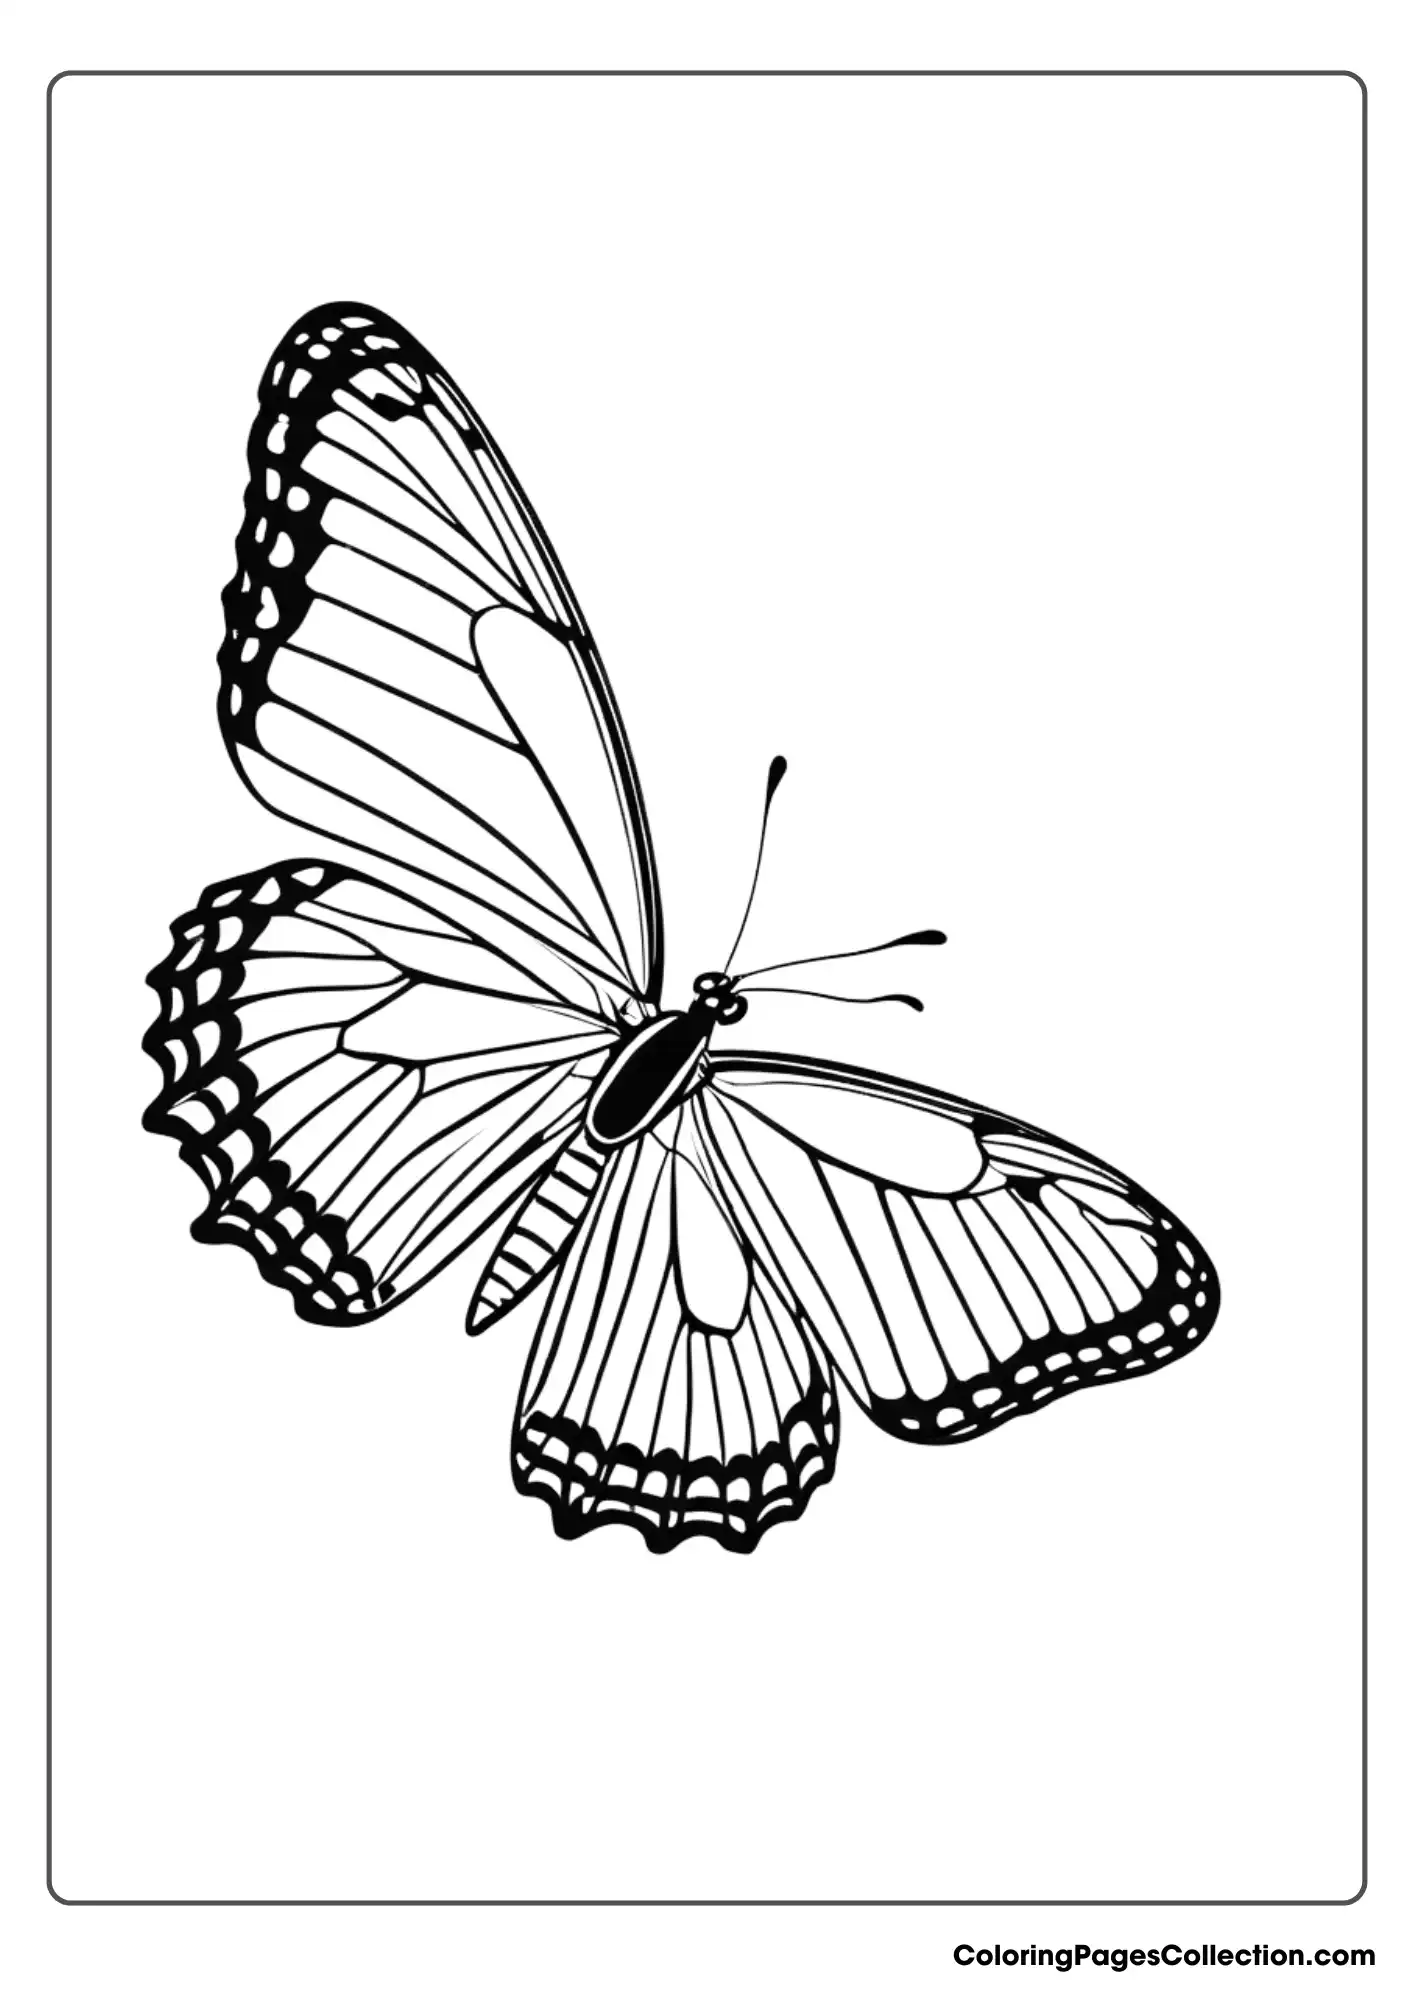 Coloring pages for teens, Simple Butterfly 